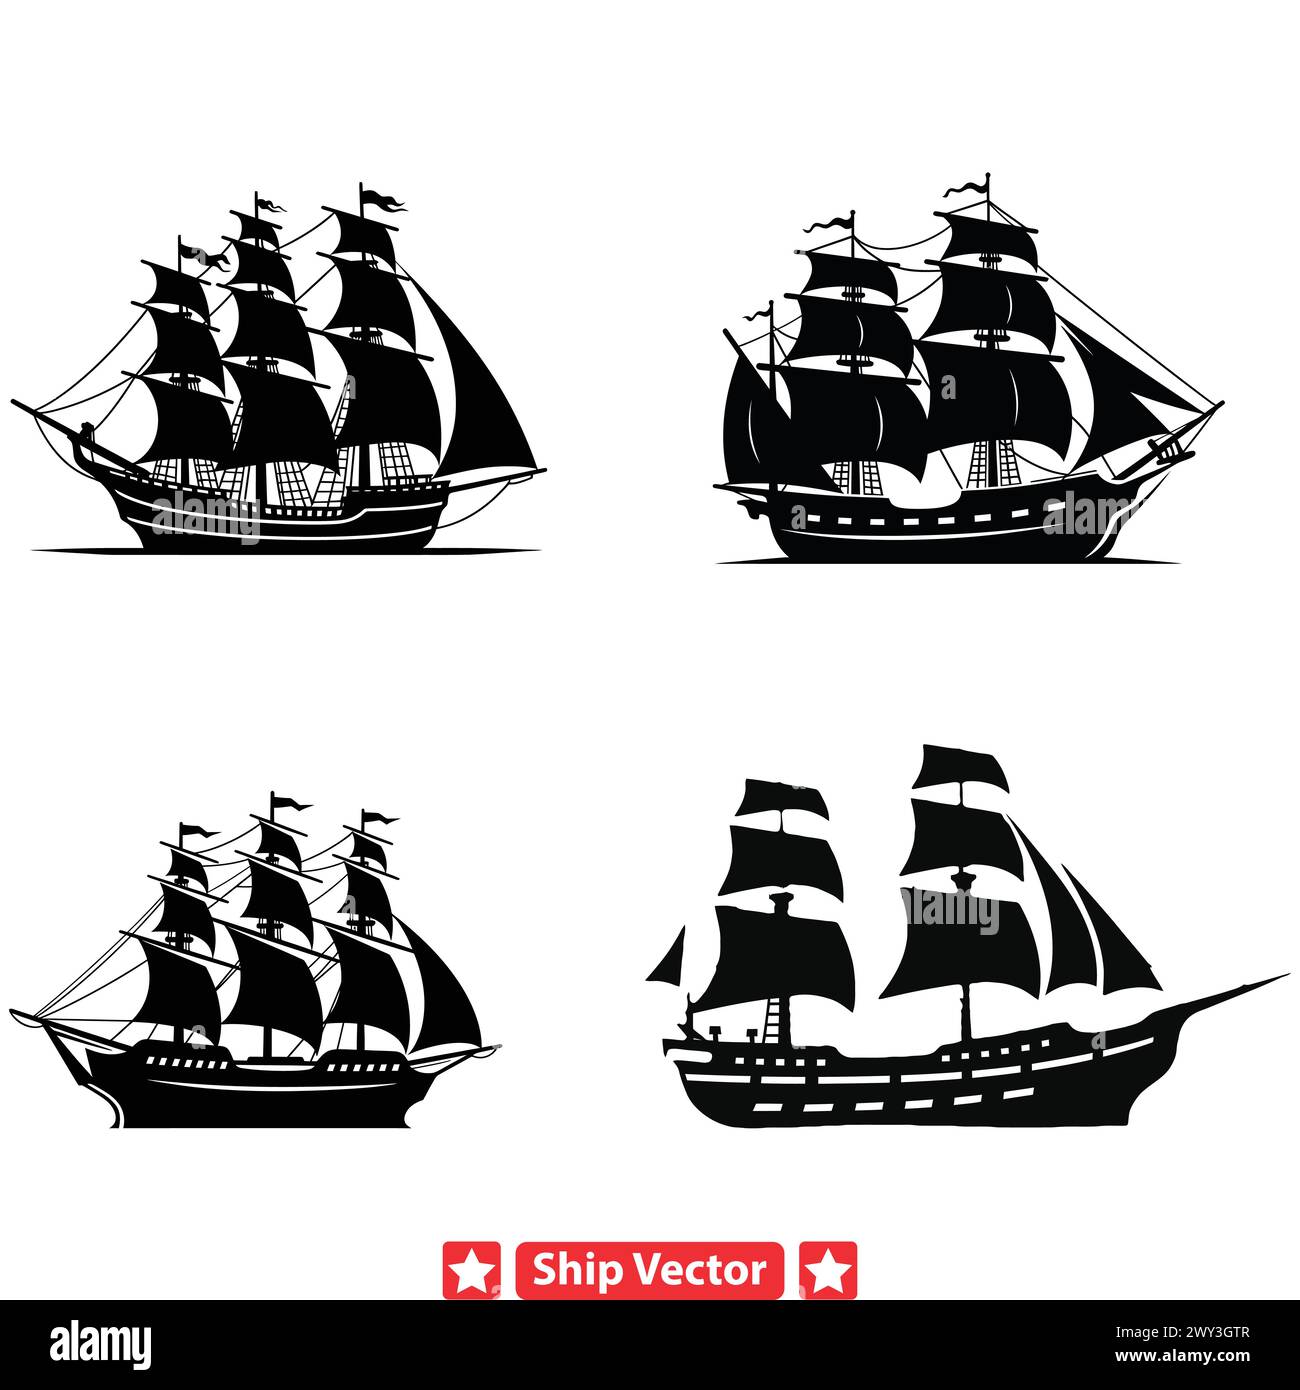 Whaling Heritage  Historical Ship Silhouettes Commemorating Traditional Maritime Practices Stock Vector